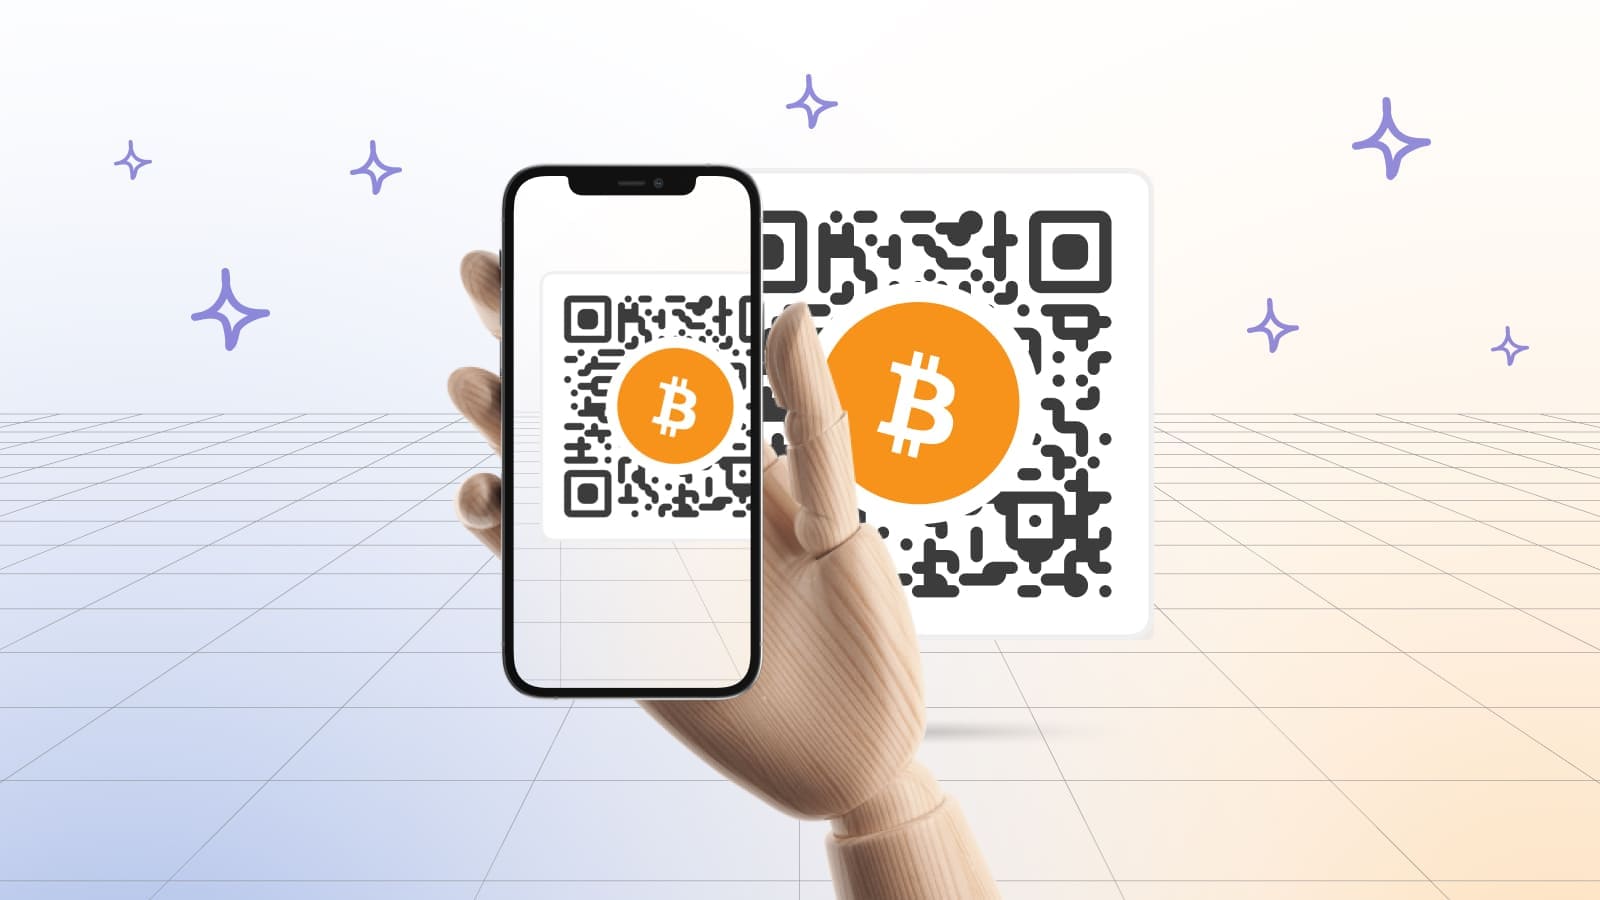 To operate with bitcoins, you need a bitcoin wallet that allows you to store, send or receive this cryptocurrency.